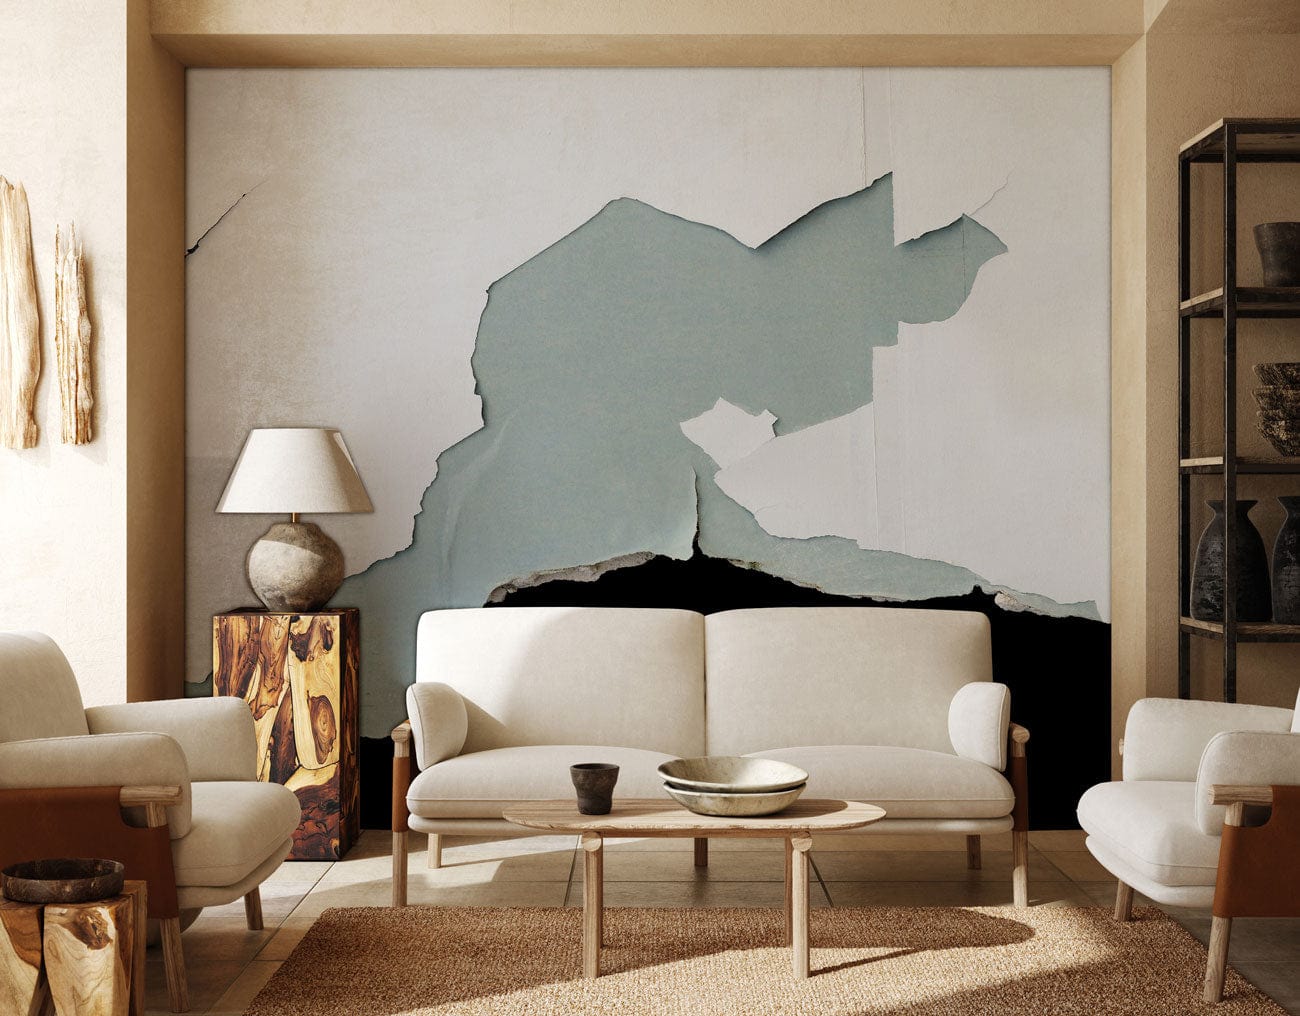 Wallpaper mural with a buckled wall skin design for use in decorating the living room.